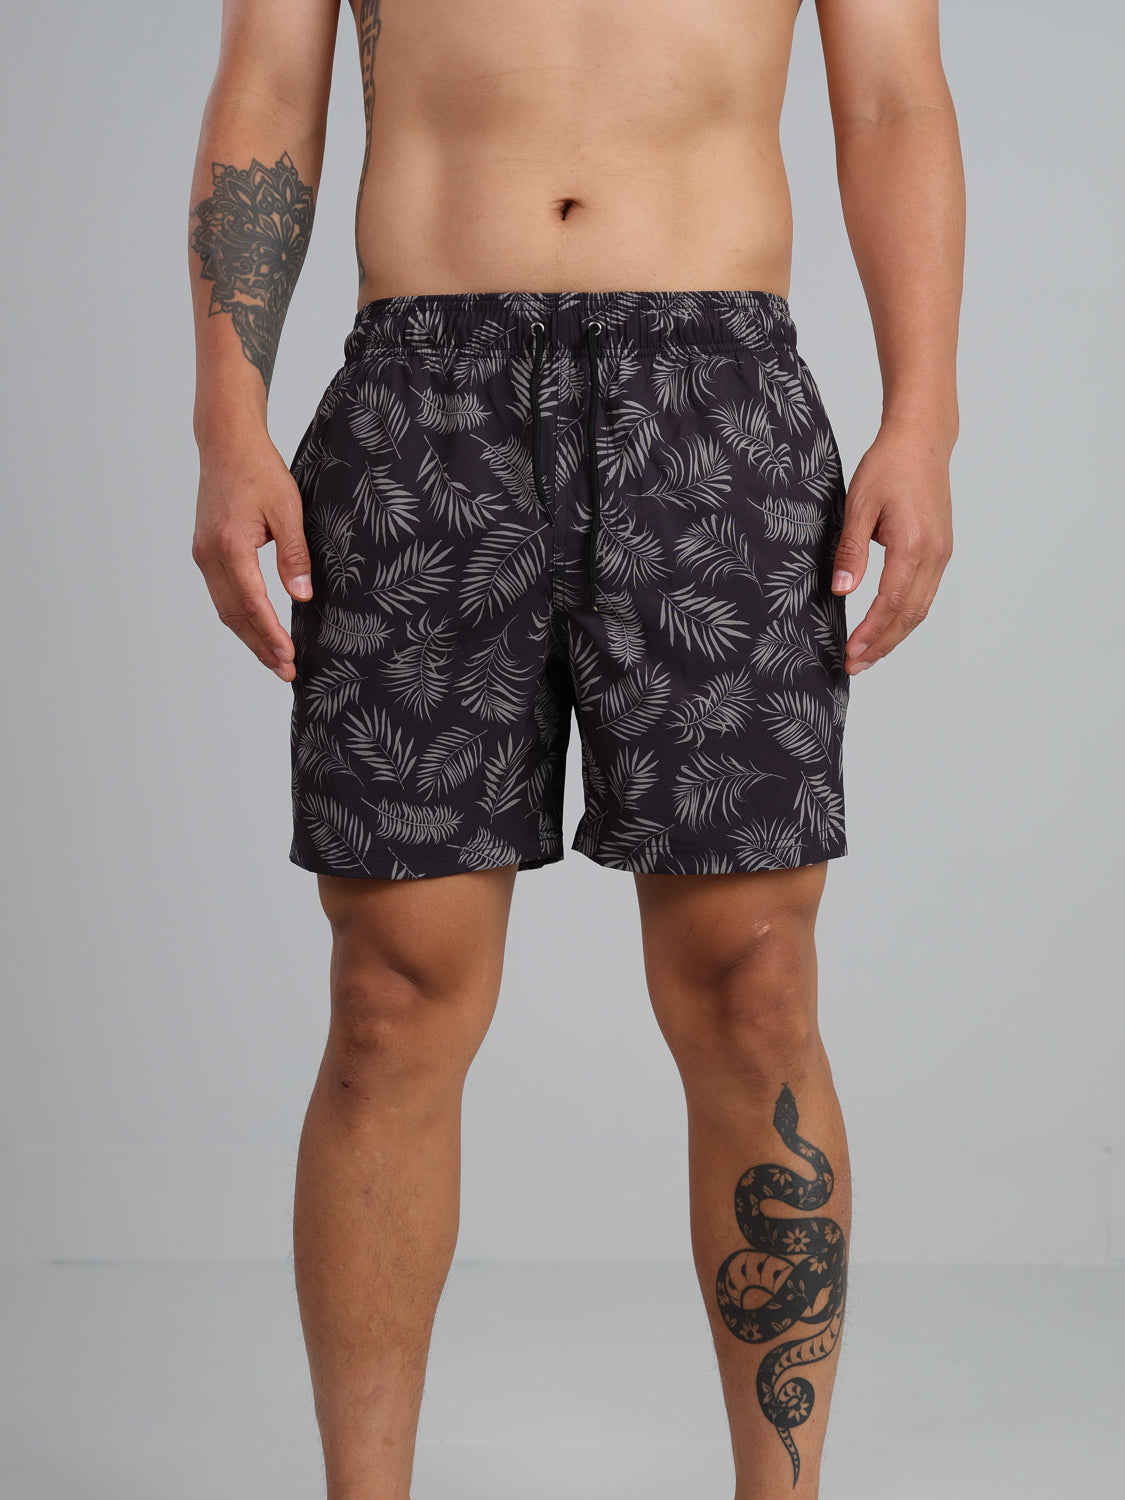 Cocopalm Palm Leaves Swim Trunk with Fast Dry and Stretch